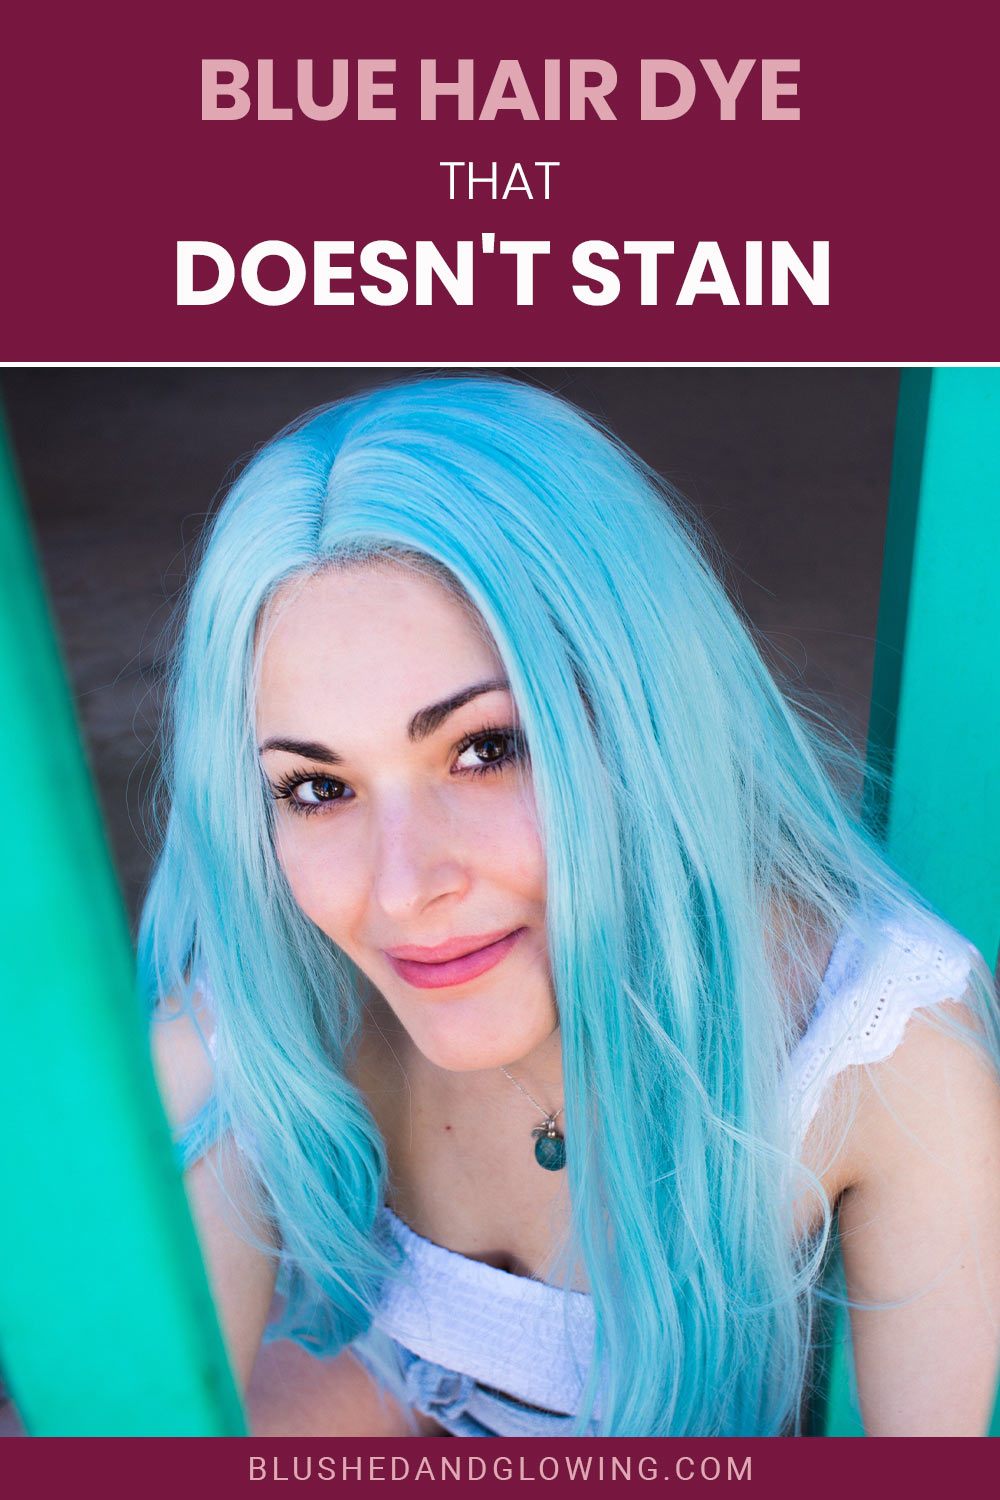 Woman with light blue hair smiling at the camera - Blue Hair Dye That Doesn’t Stain